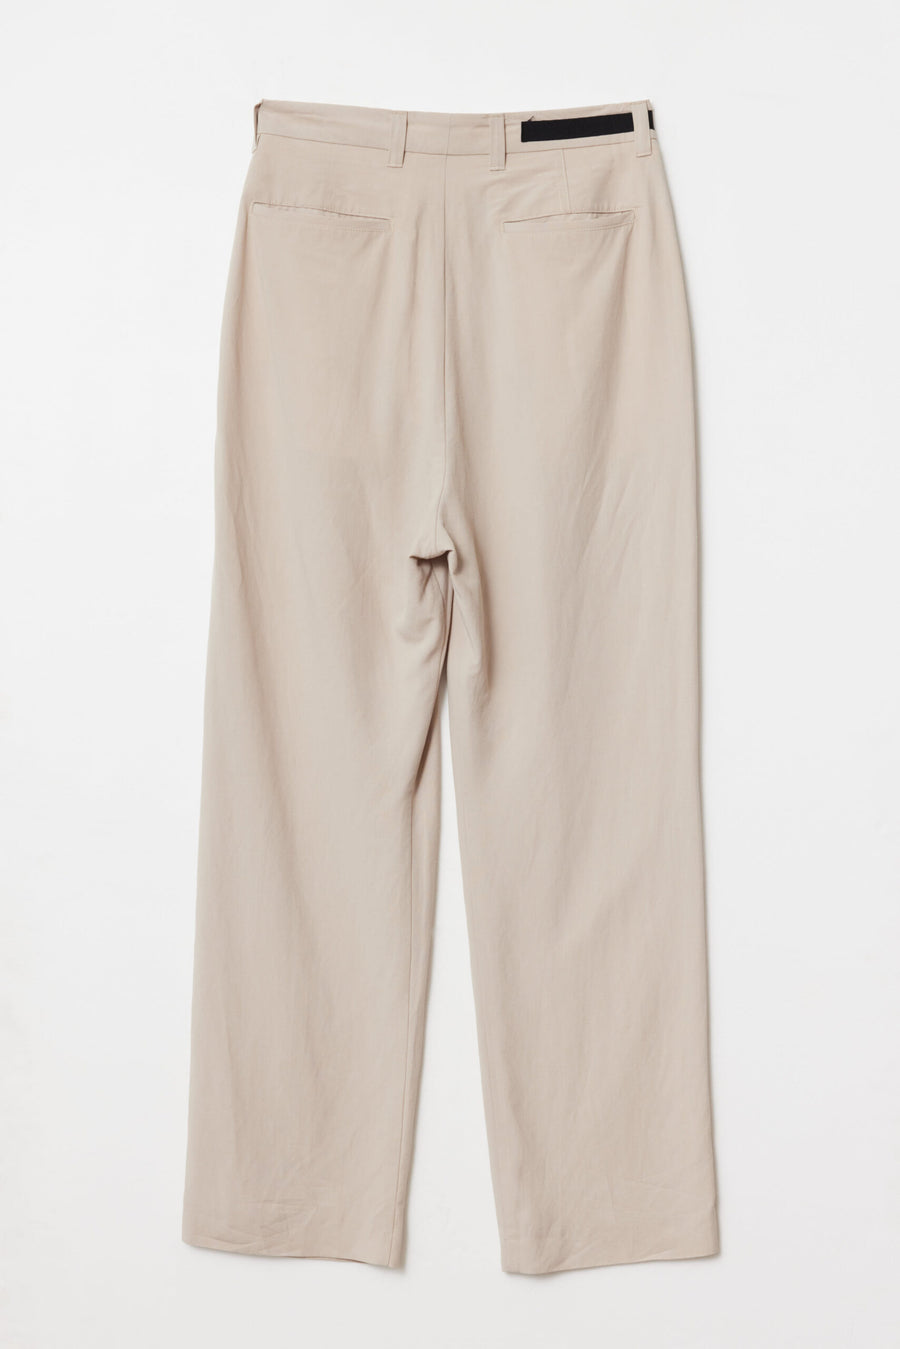 ADNYM GRAND TROUSERS IN CEMENT